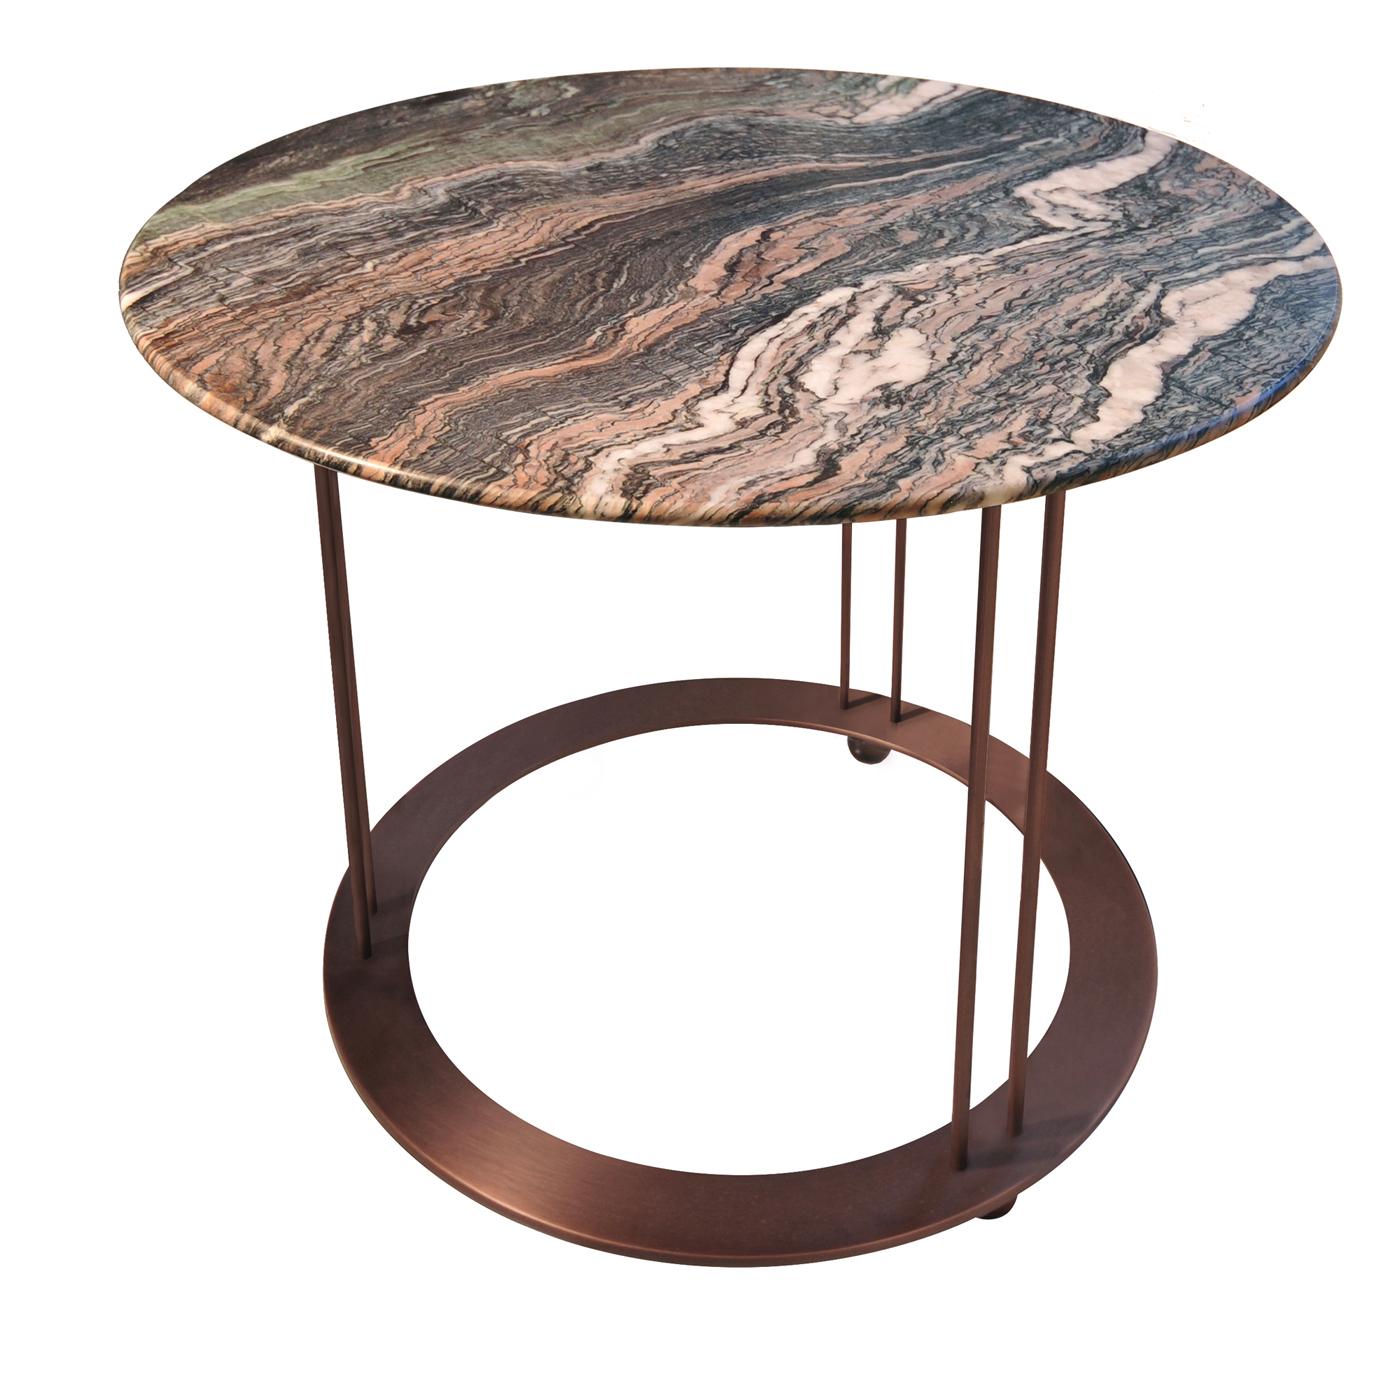 A mesmerizing combination of elegant, warm hues, this superb coffee table exudes timeless sophistication. The round top is made of Red Luana marble, whose natural colors exquisitely complement the galvanized copper metal structure comprising three